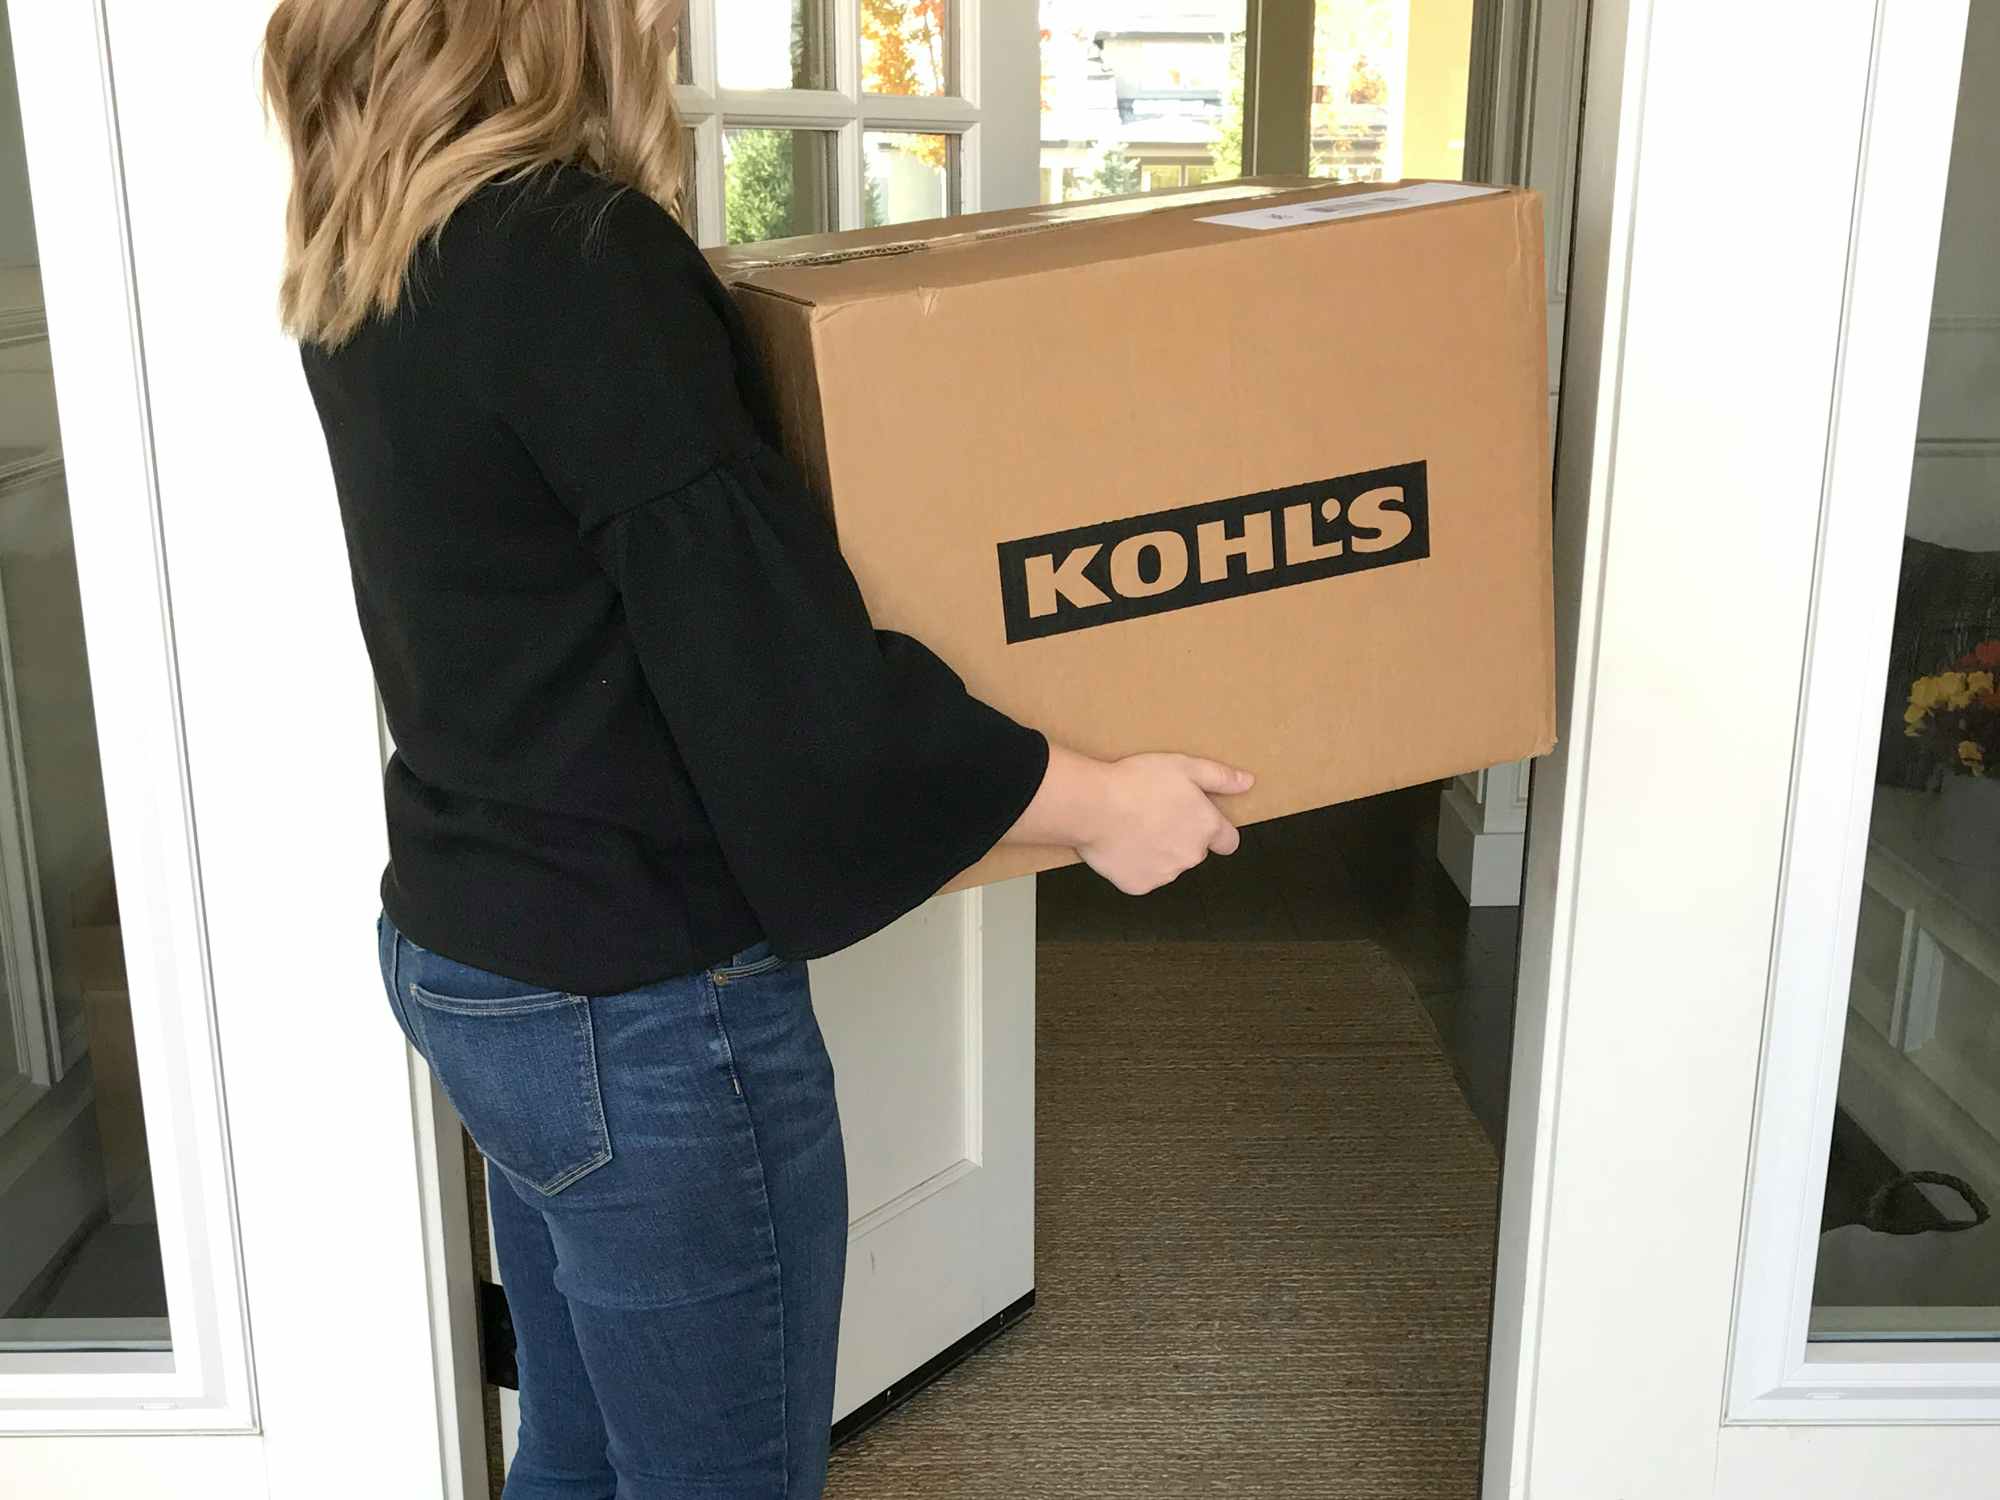 a person holding a kohls box walking into their house